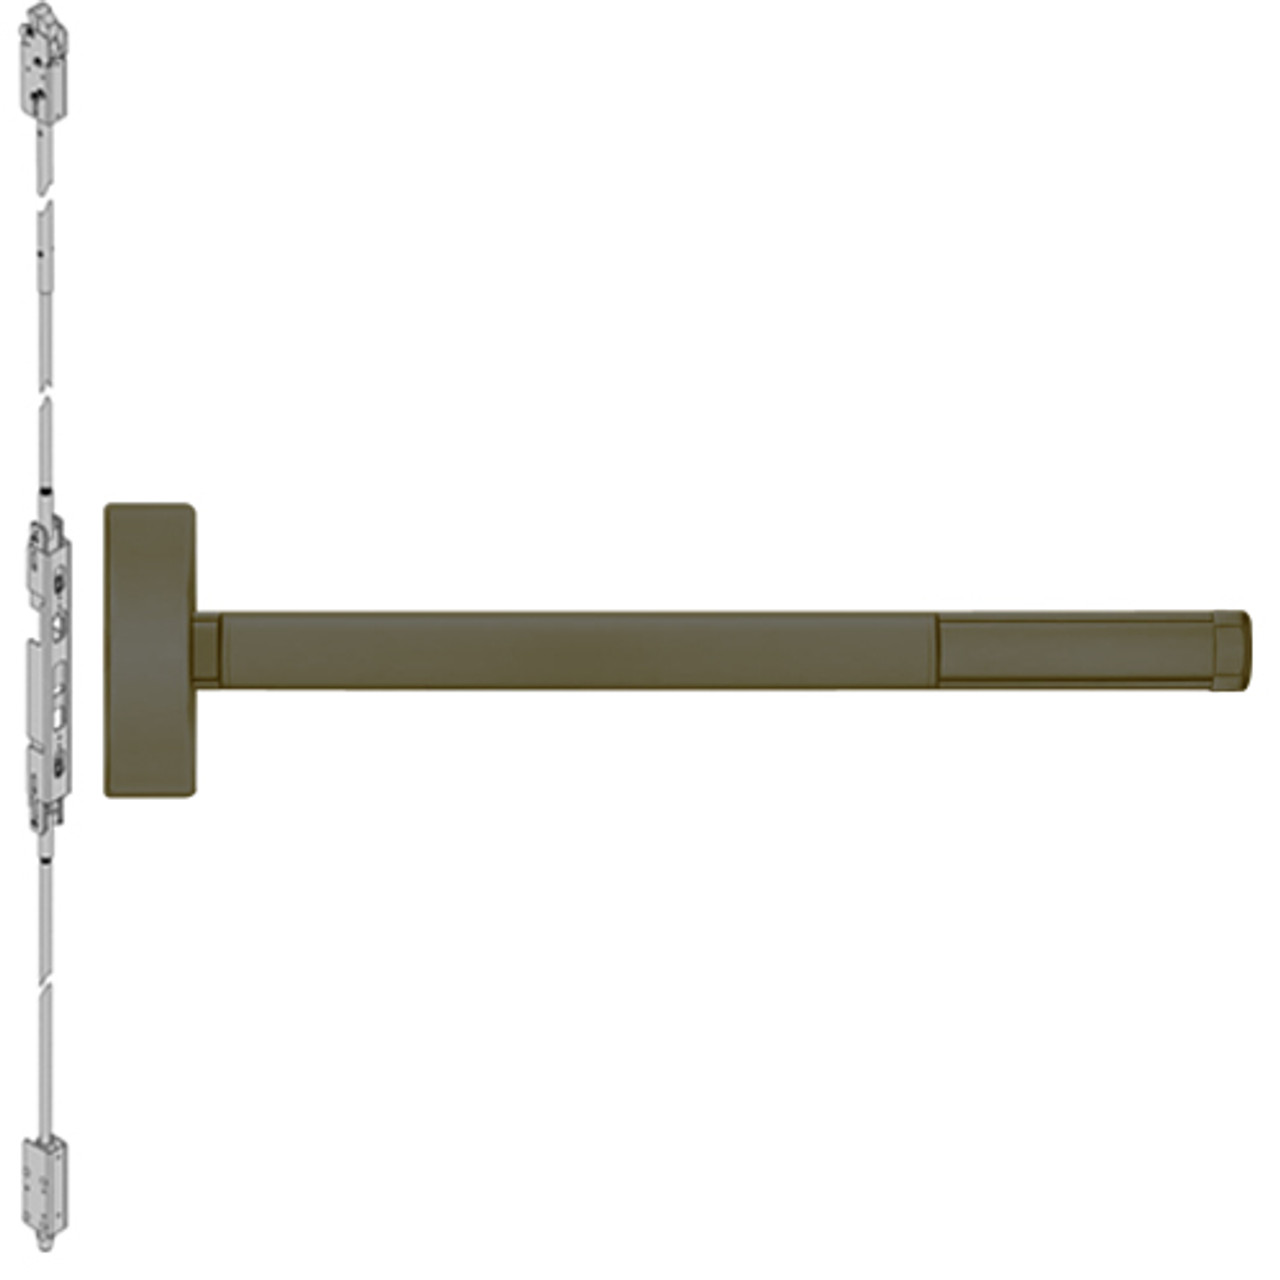 DE2801LBR-613-36 PHI 2800 Series Concealed Vertical Rod Exit Device with Delayed Egress Prepped for Cover Plate in Oil Rubbed Bronze Finish